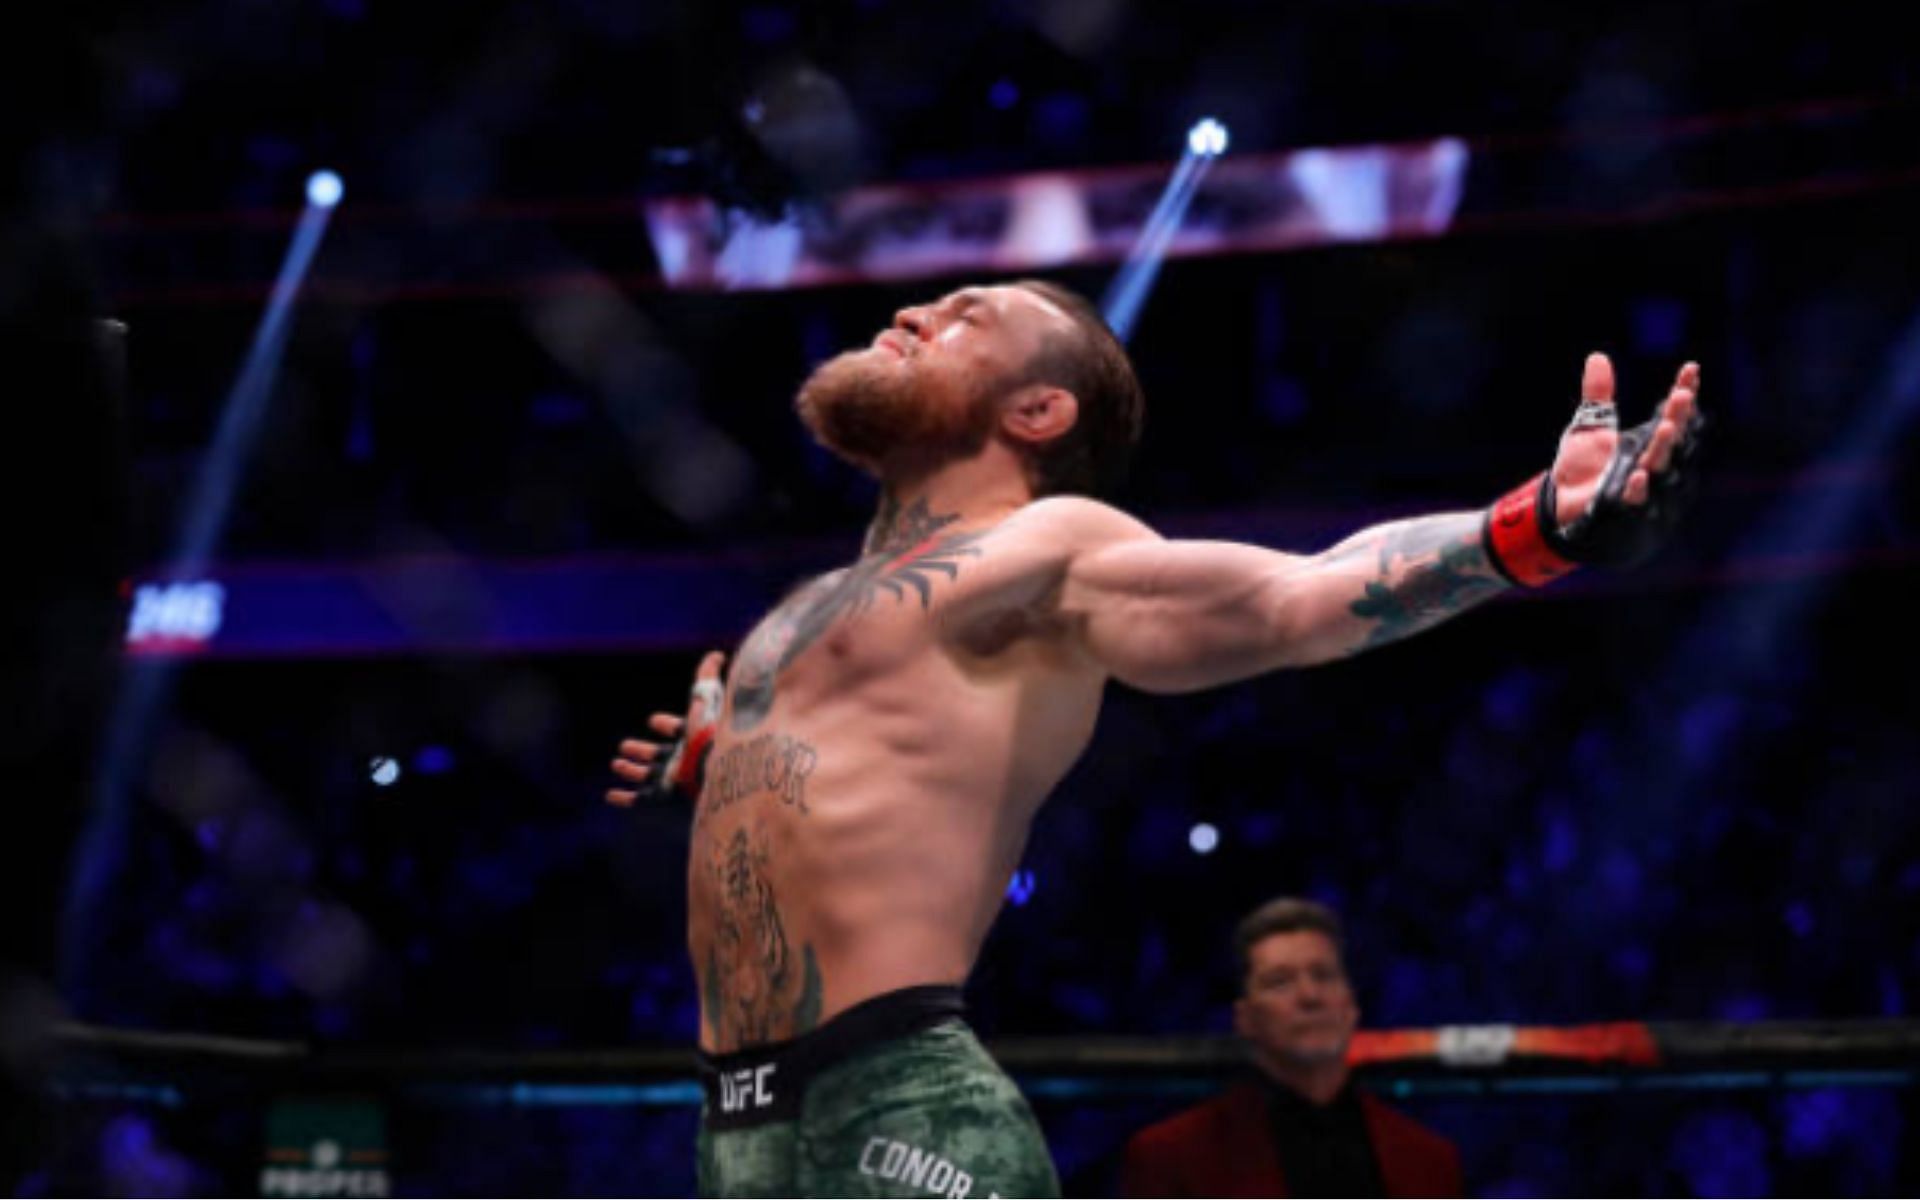 Conor McGregor at UFC 246 [Photo Courtesy of Getty Images]